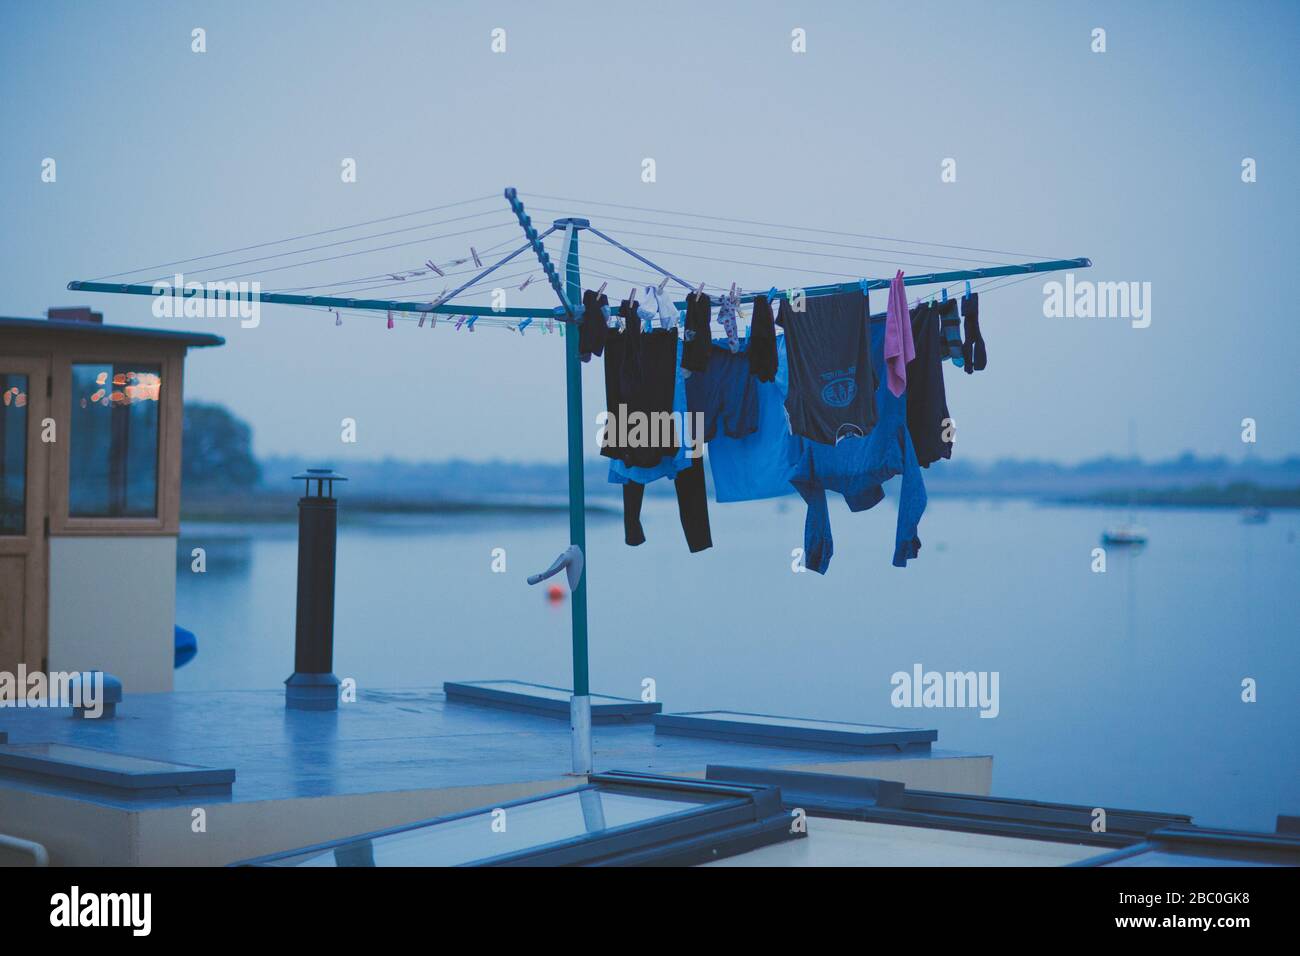 washing hanging to dry on an old houseboat Stock Photo